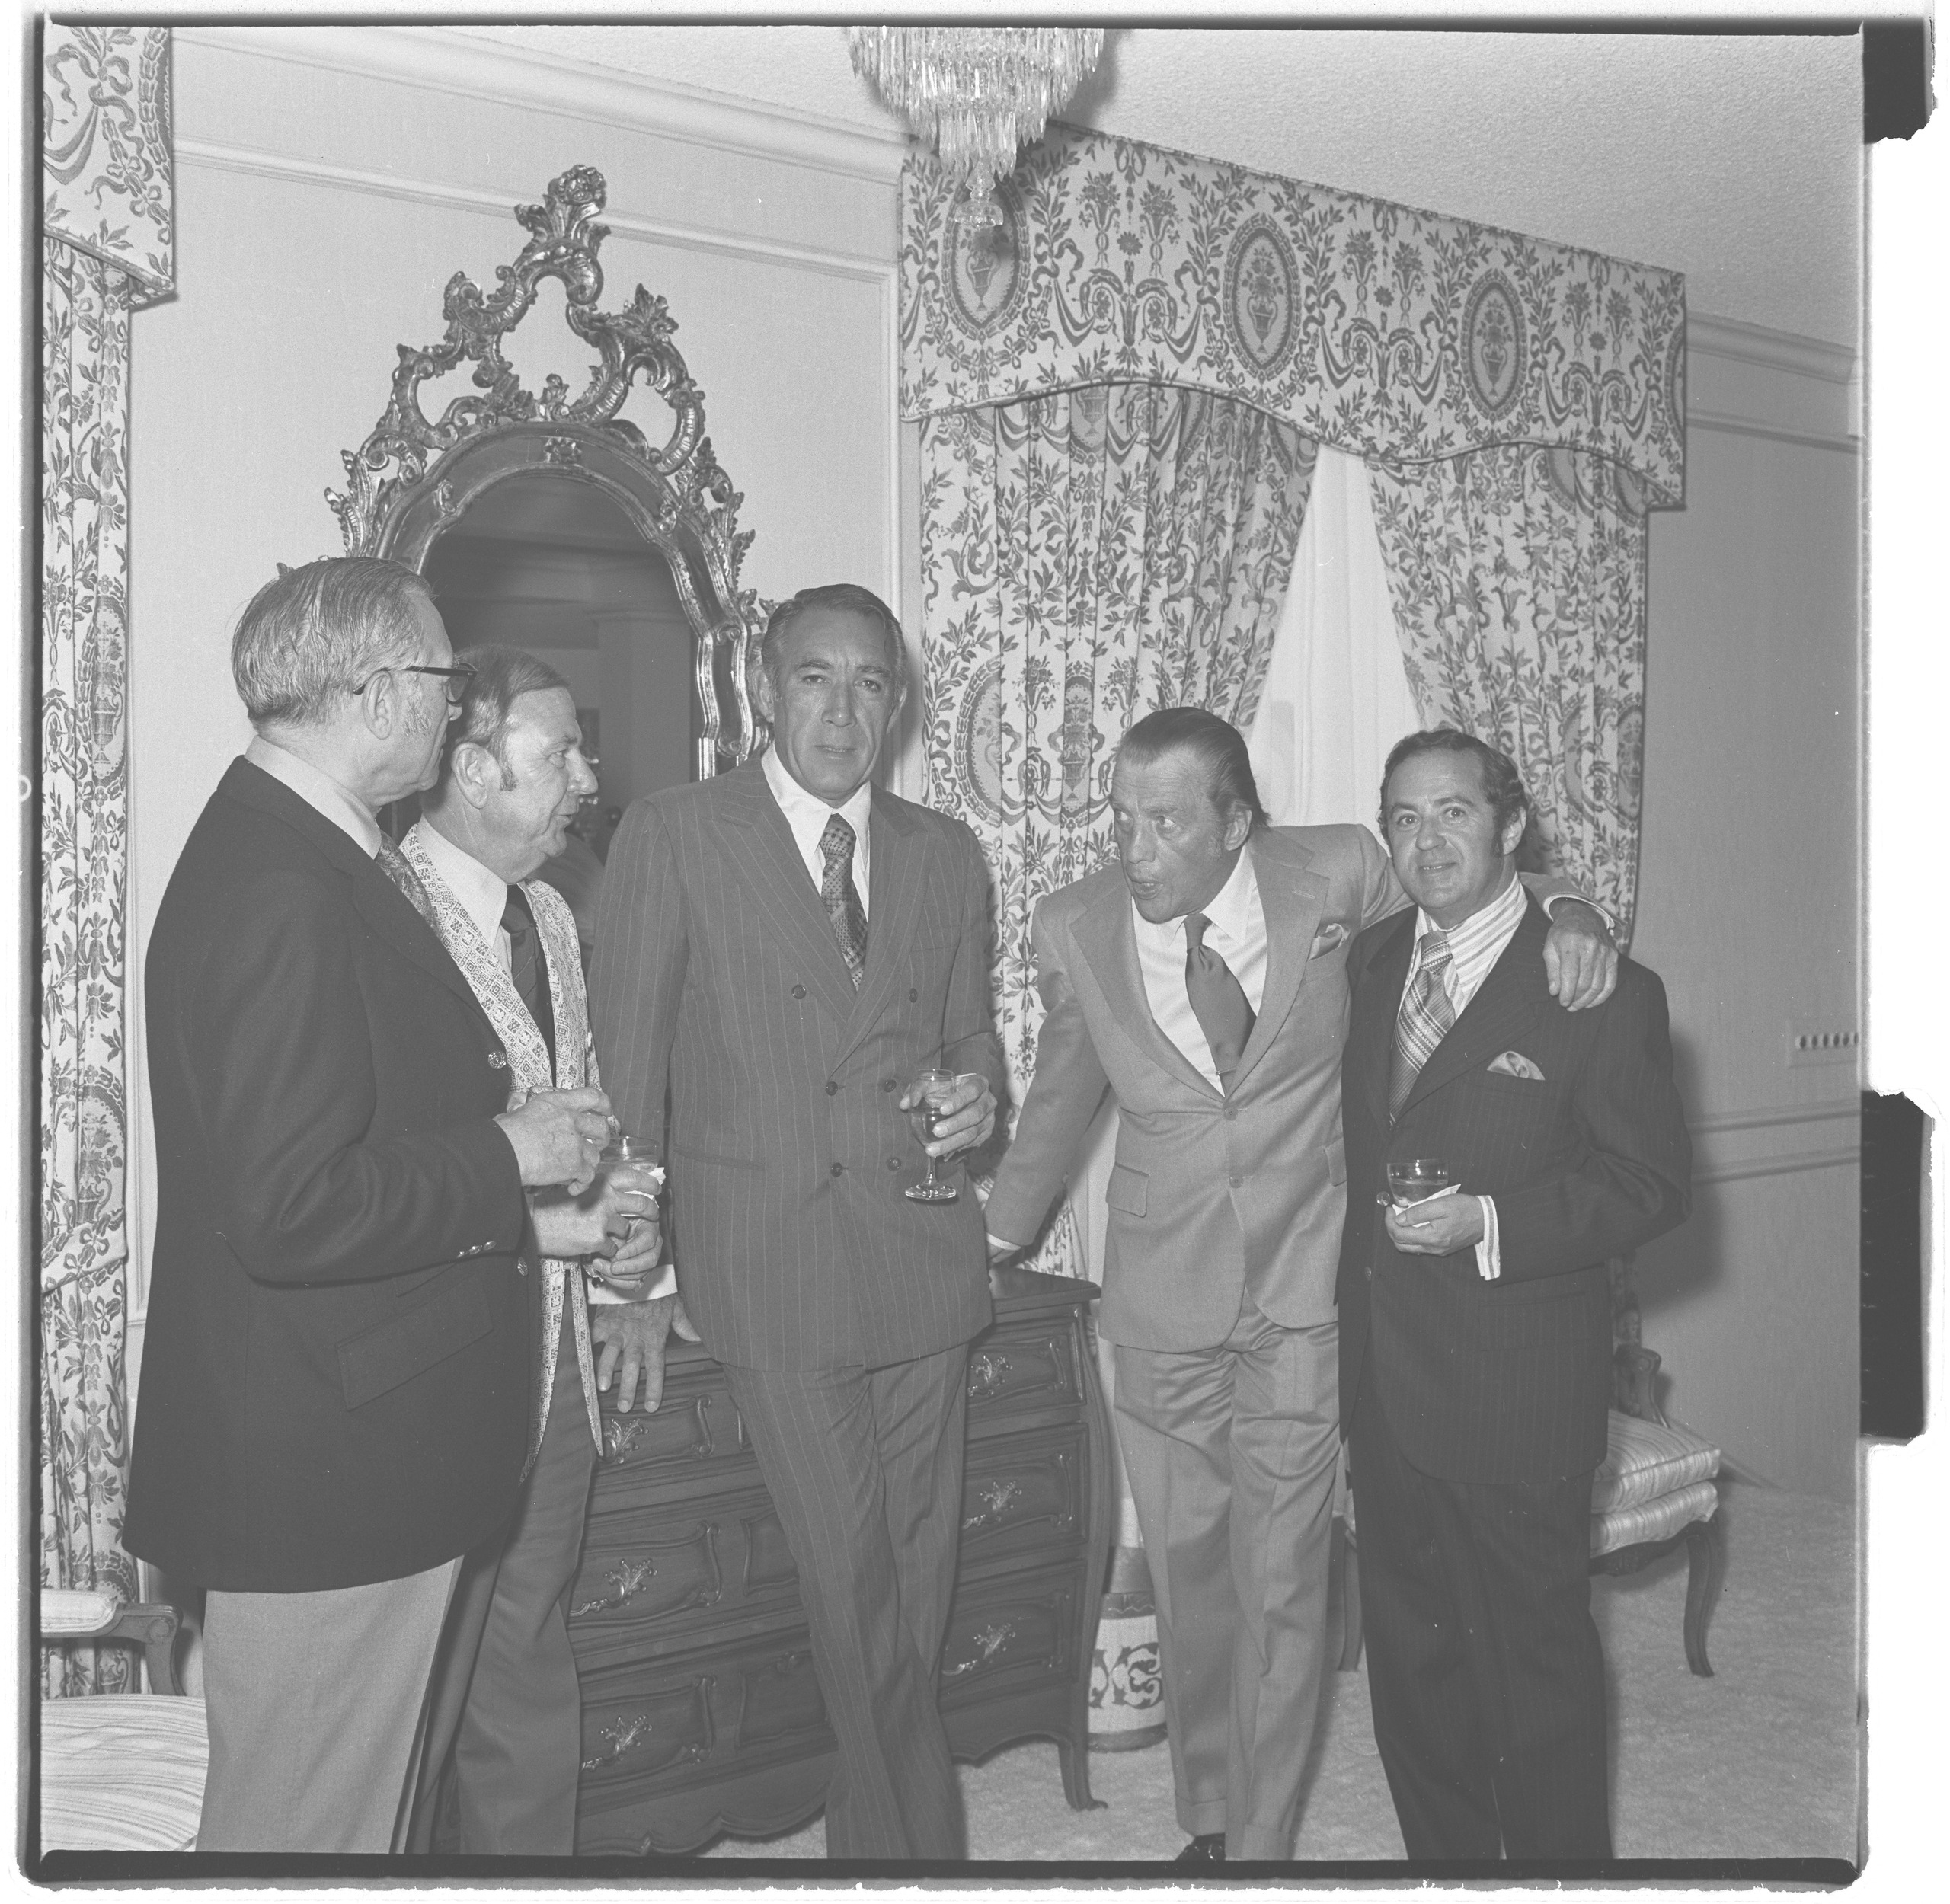 Photographs of Combined Jewish Appeal Caesars Palace with Anthony Quinn and Ed Sullivan, image 02